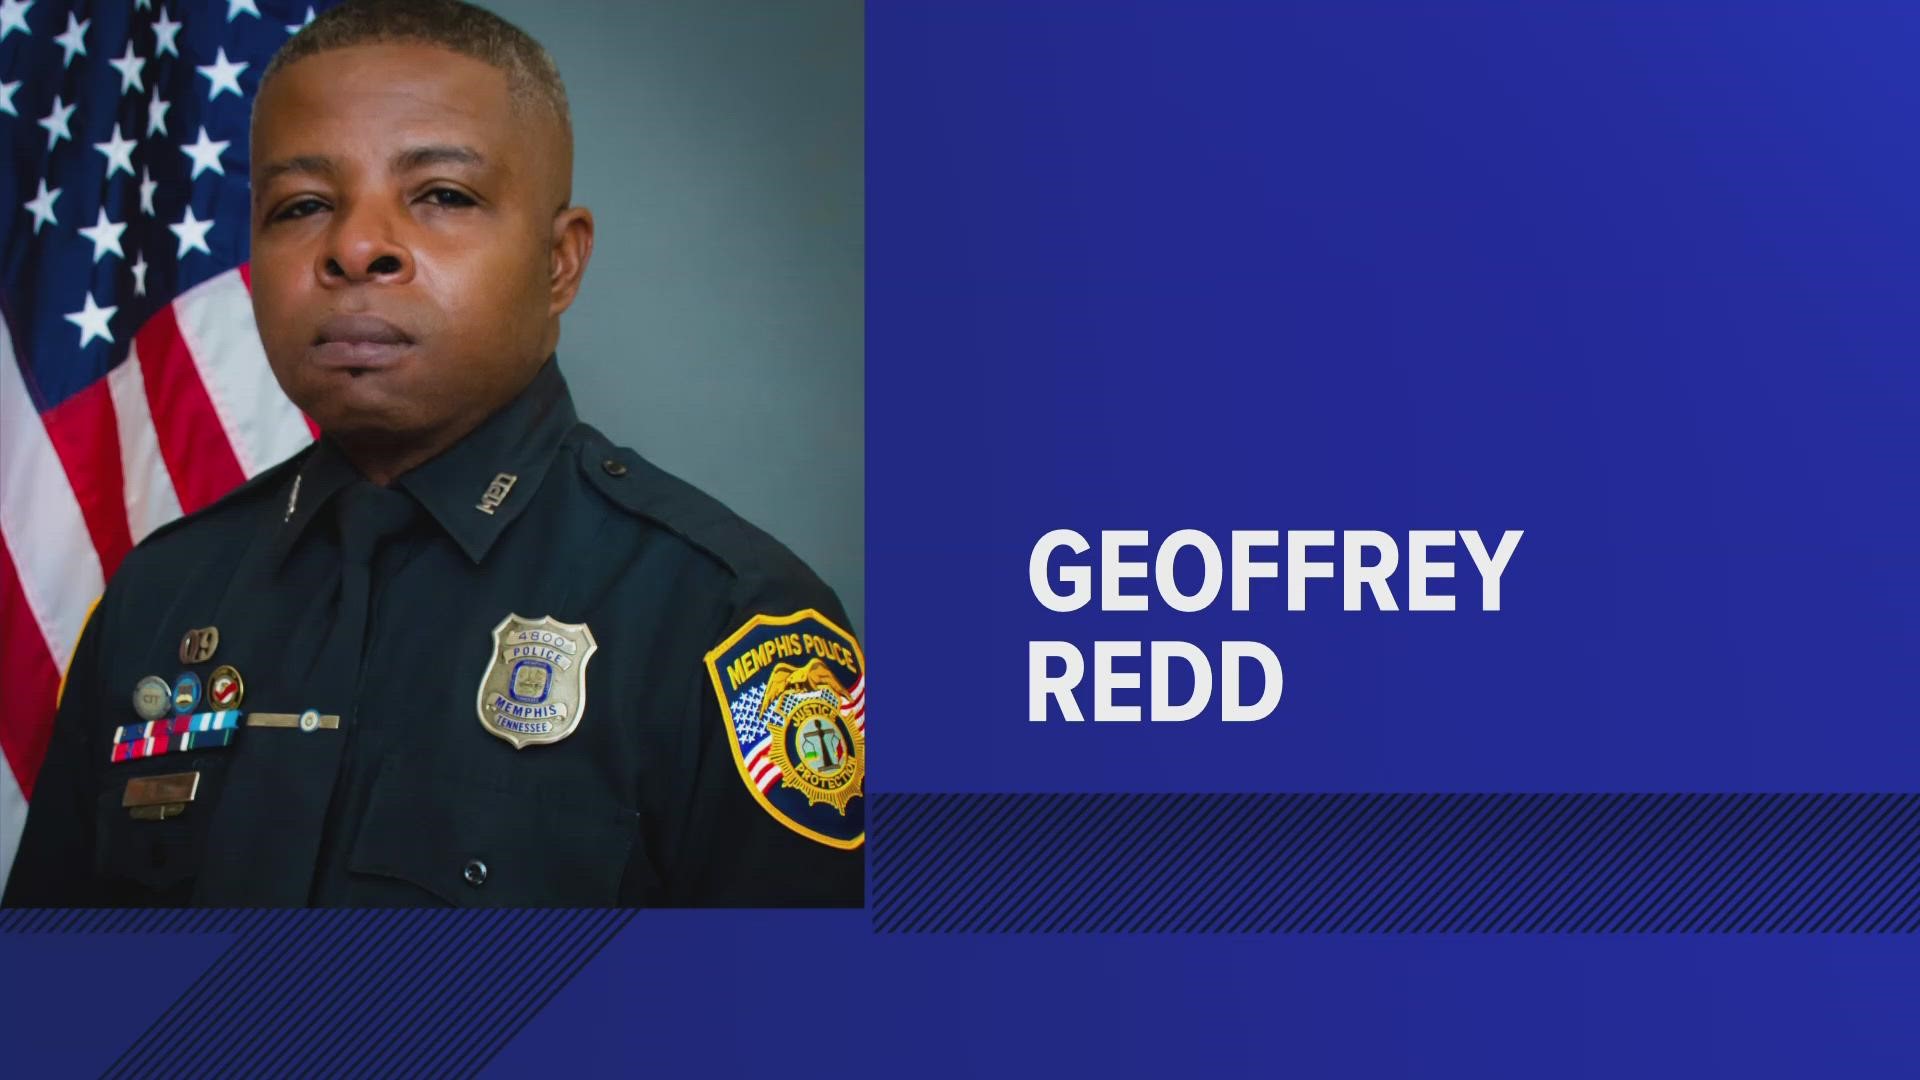 After 15 days of Memphians rallying for Geoffrey Redd to recover from being shot in an East Memphis library, the former marine died on Saturday, according to MPD.